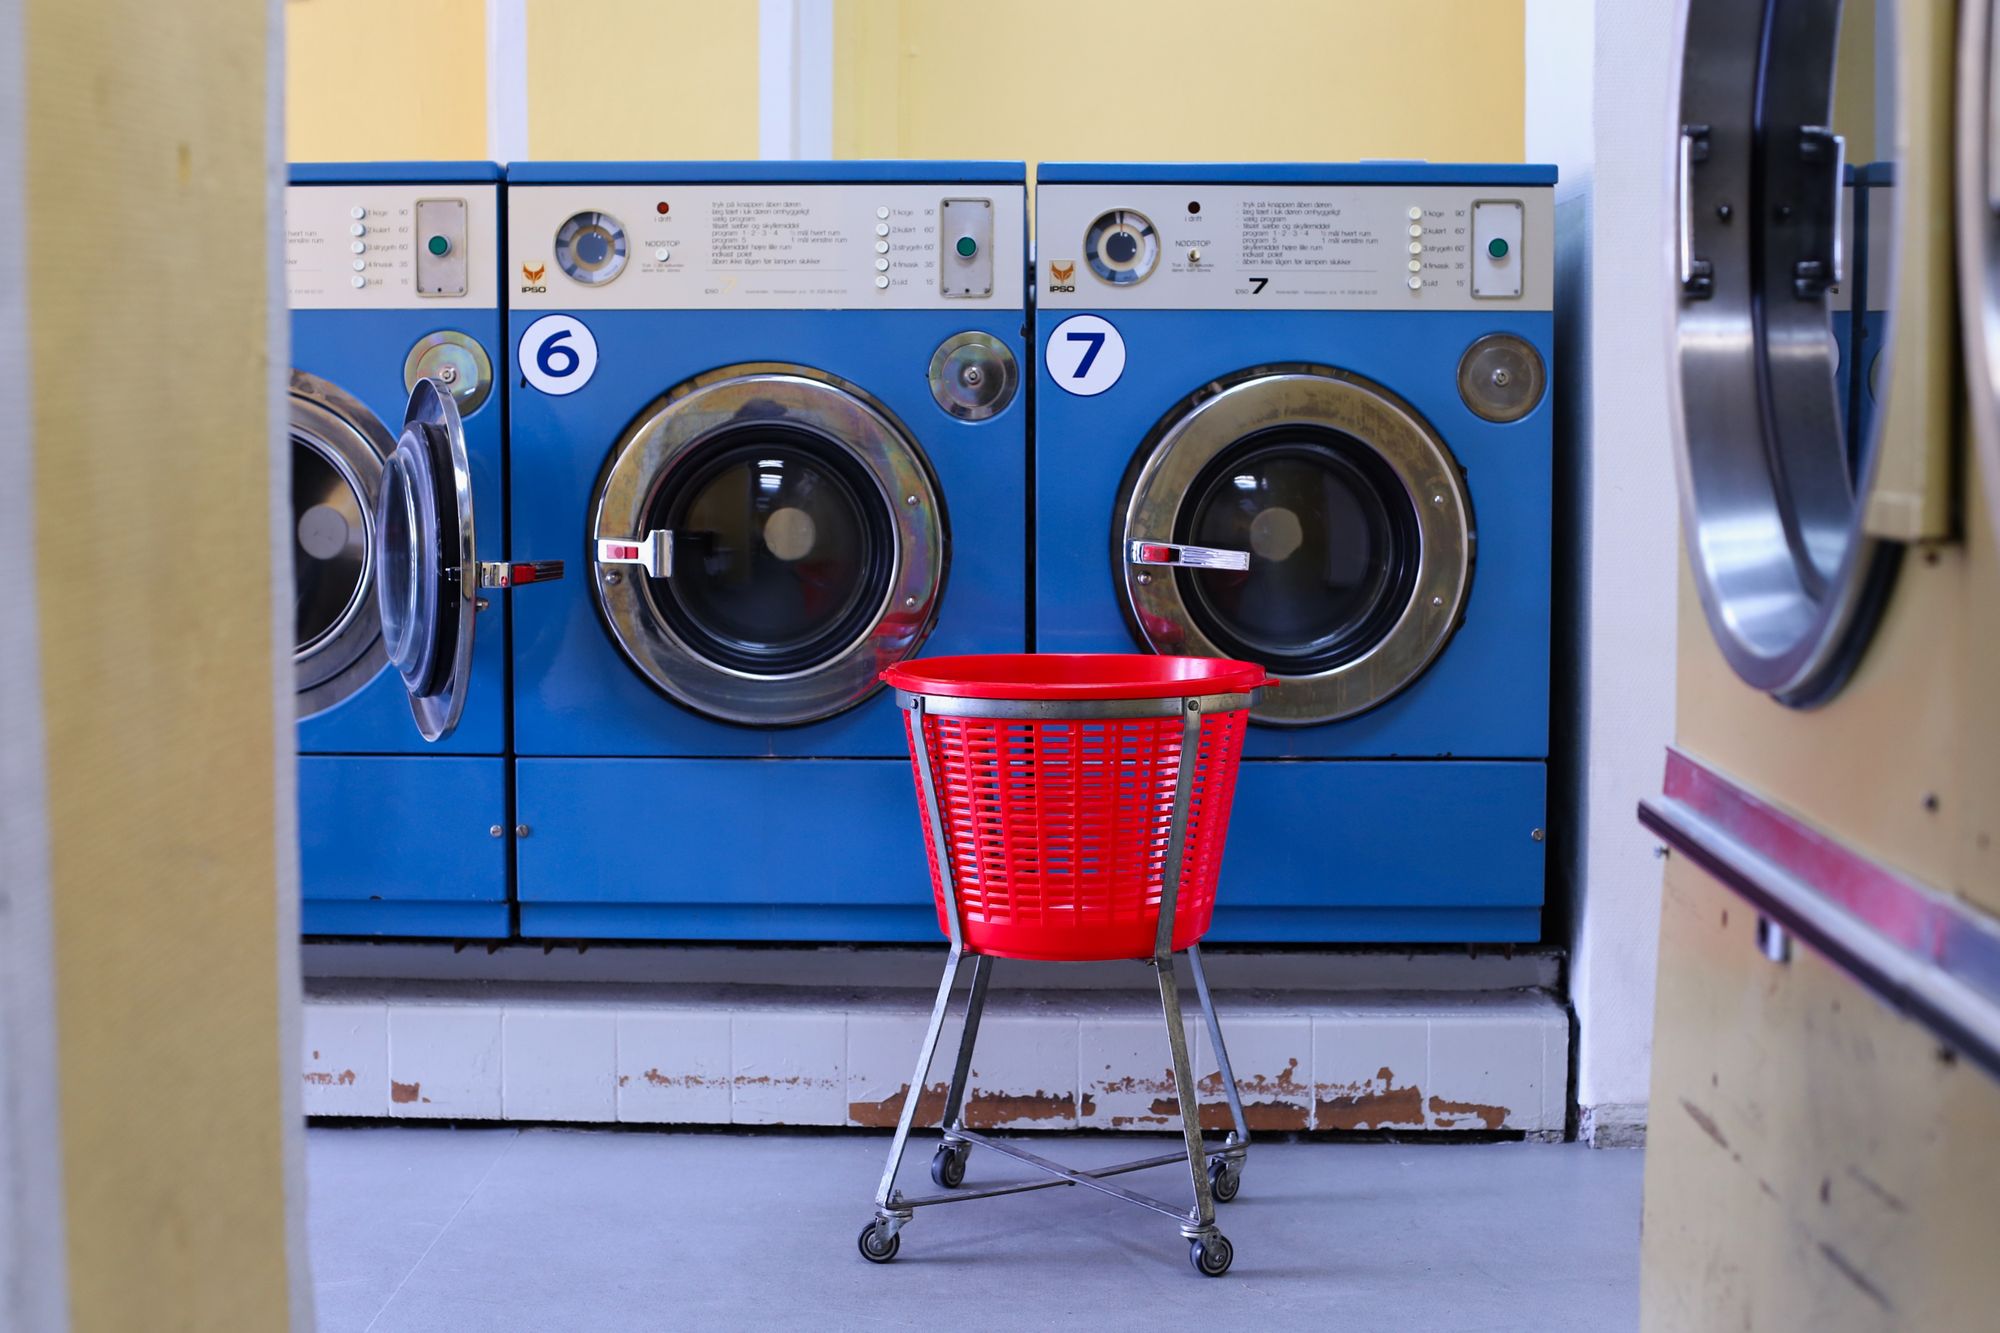 Choosing the Right Washing Machine for Your Home